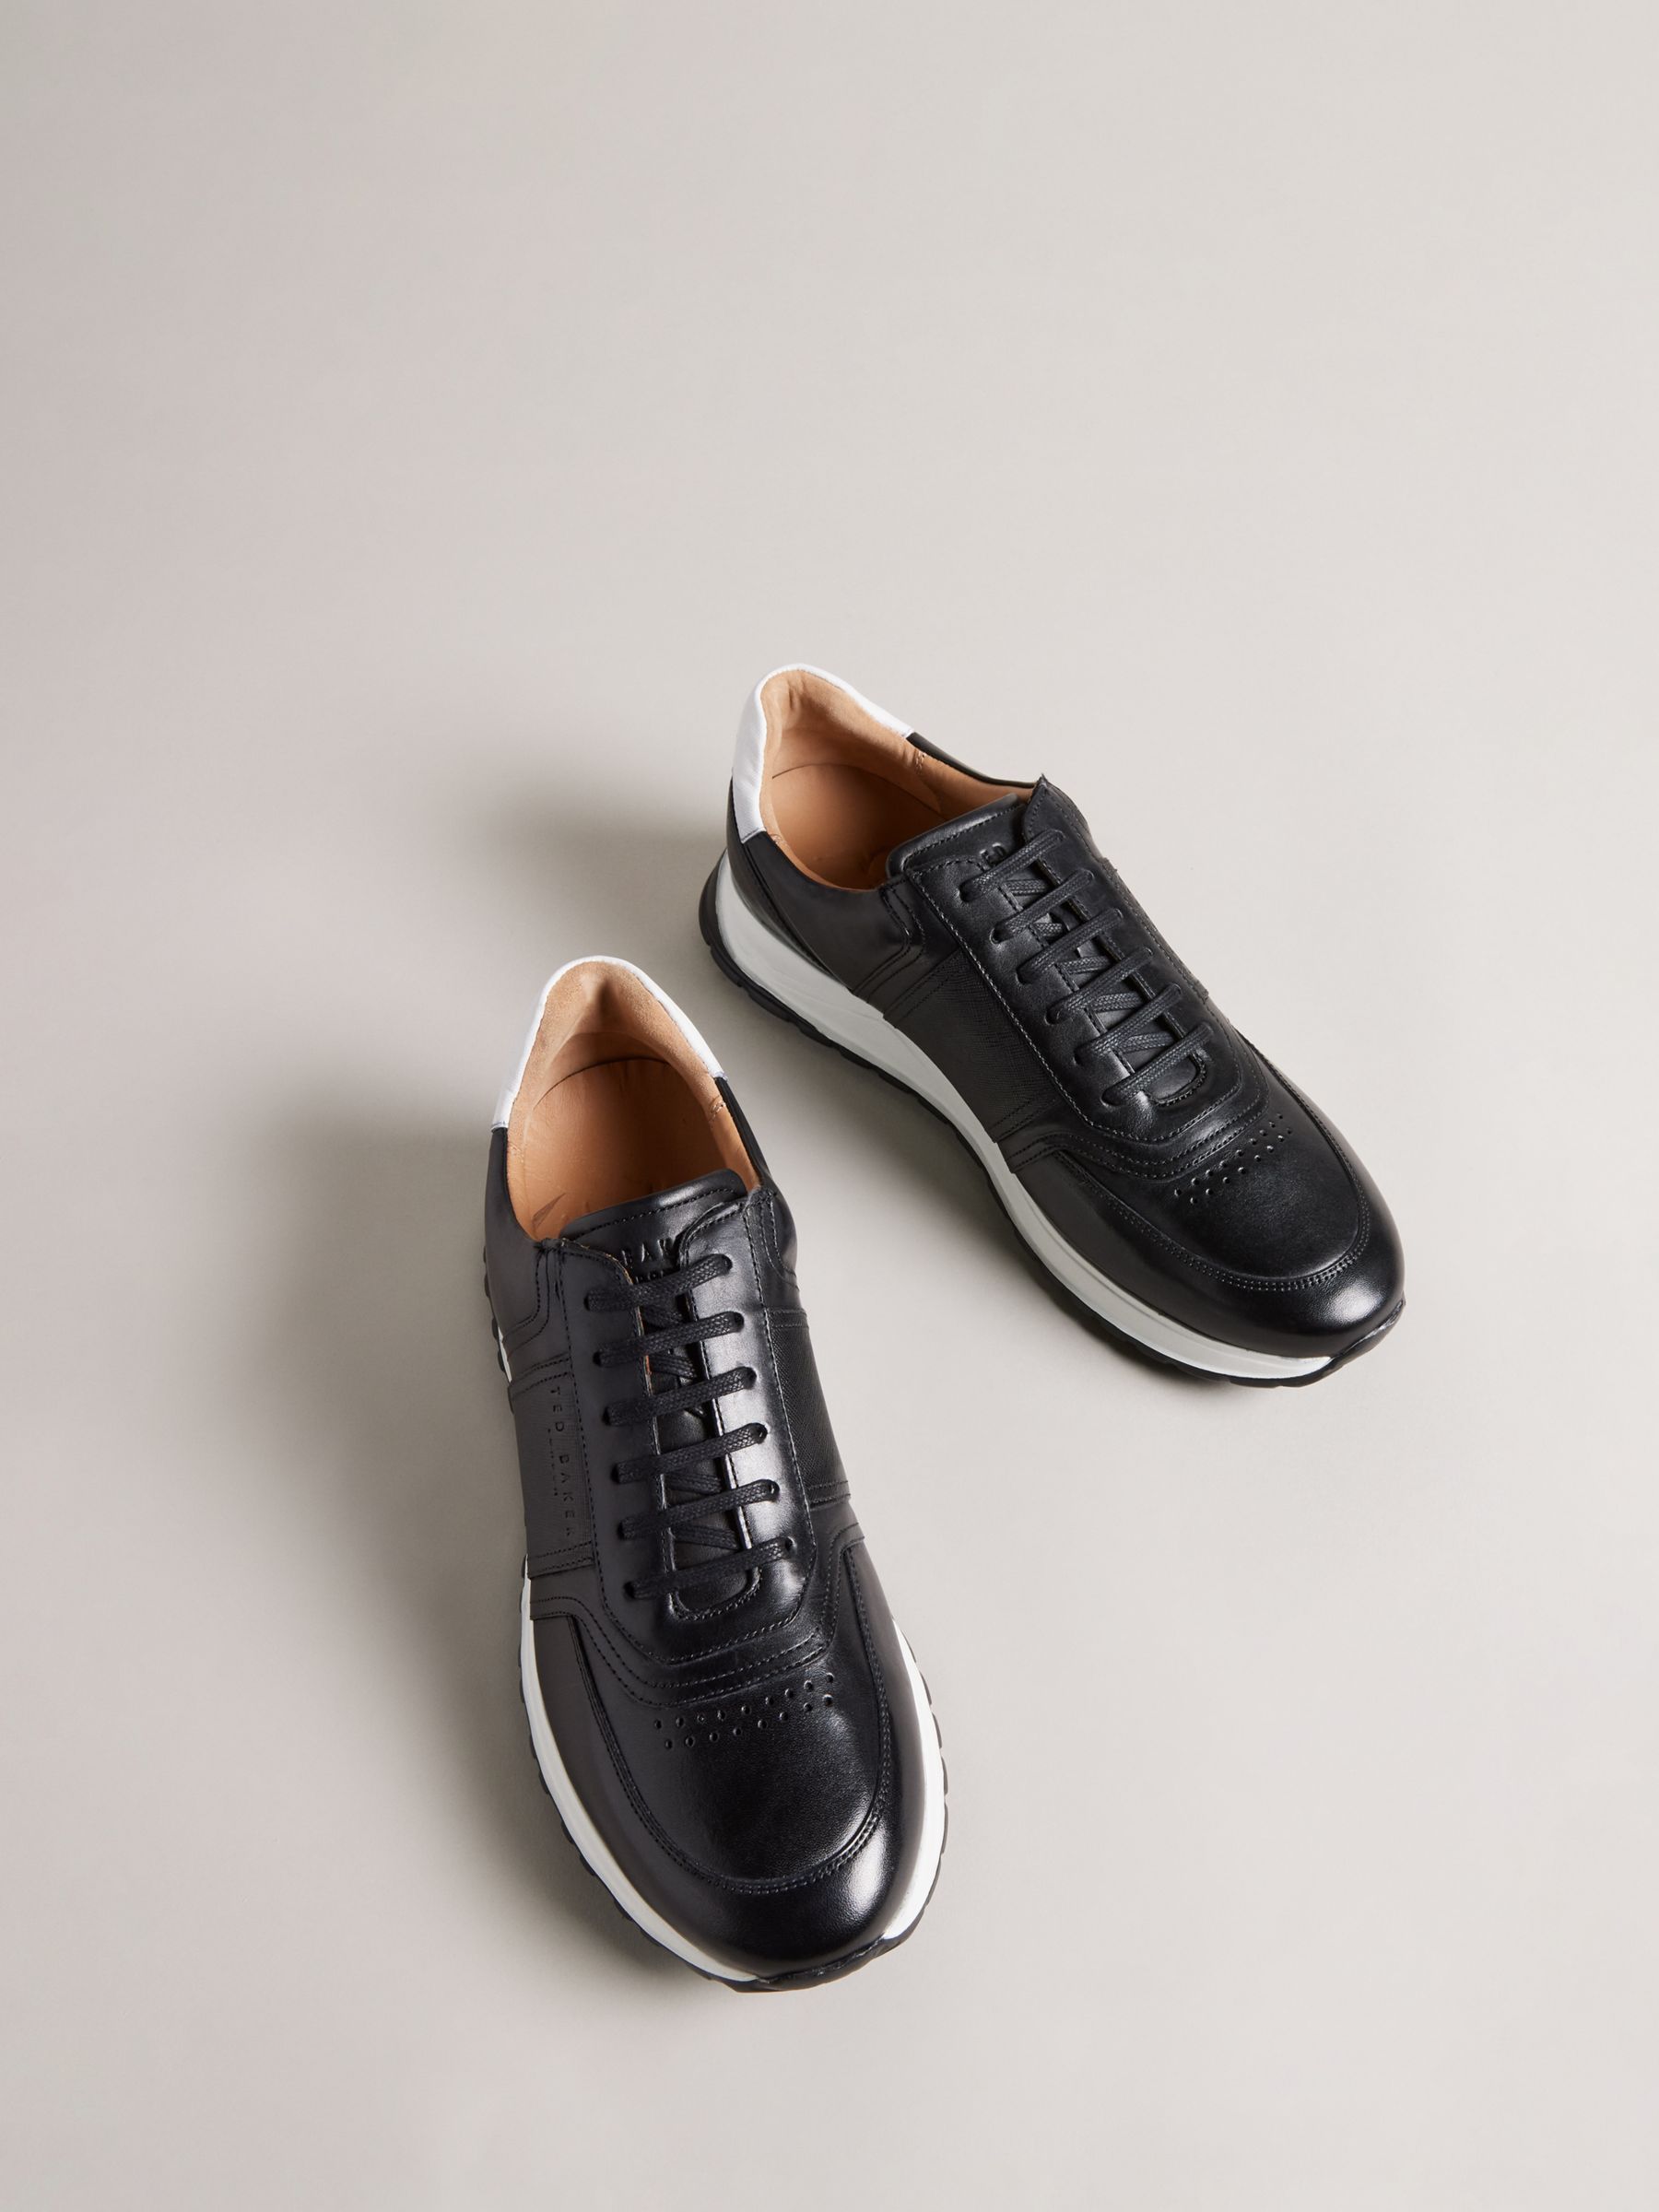 Ted Baker Frayne Leather Retro Trainers, Black at John Lewis & Partners